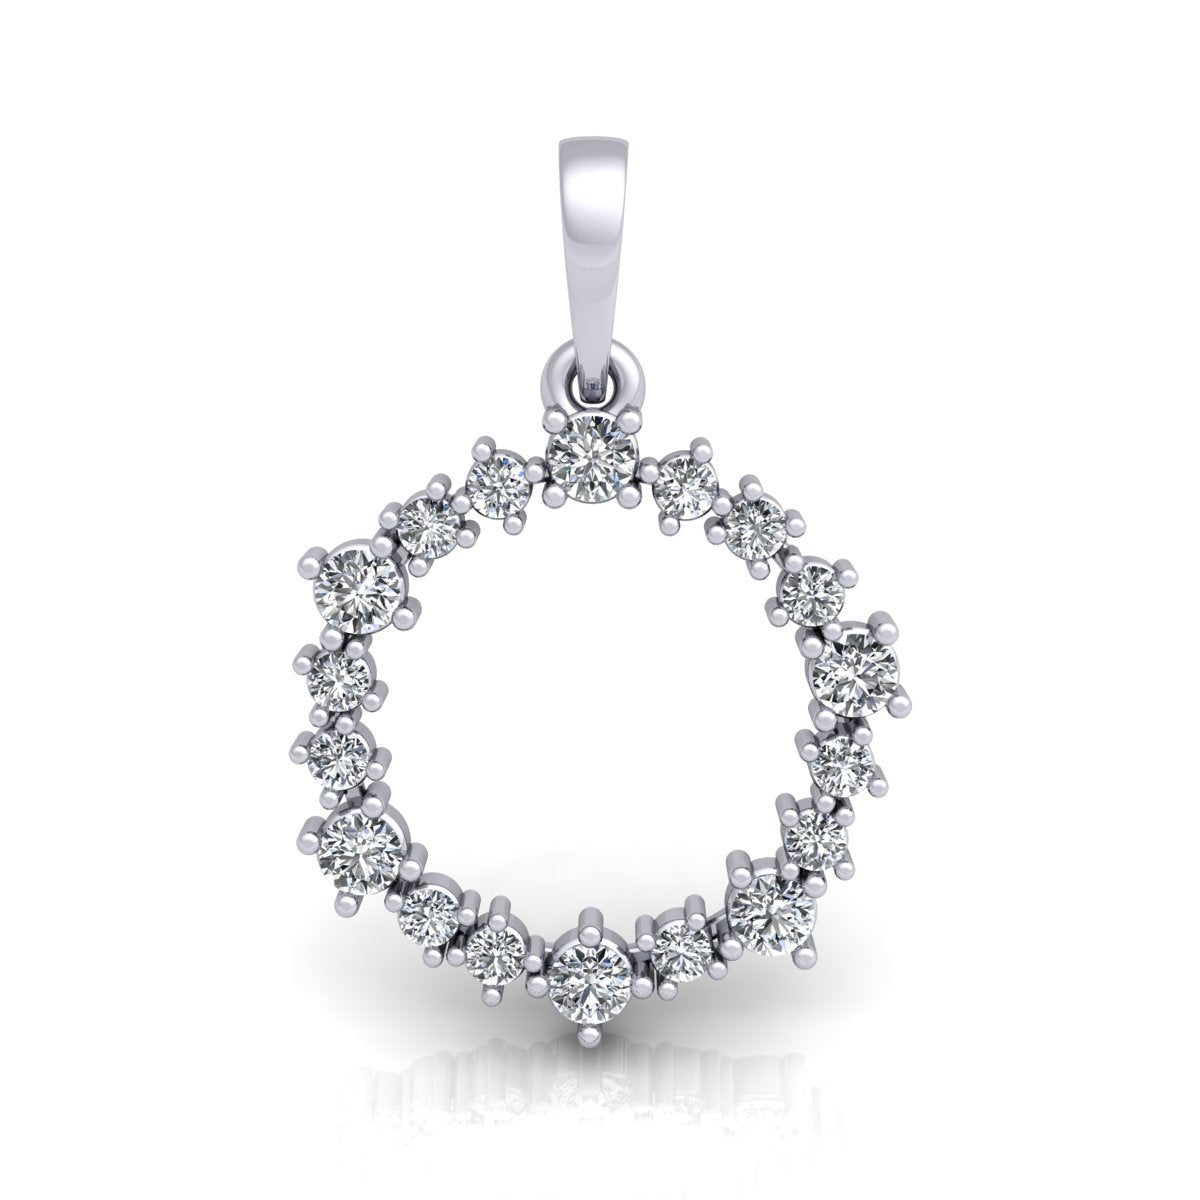 1.25 CT 14K White Gold D VVS2 Diamond Rounded Pendant Pendant Round Cut Certified For Him For Her Anniversary Beautiful Gift